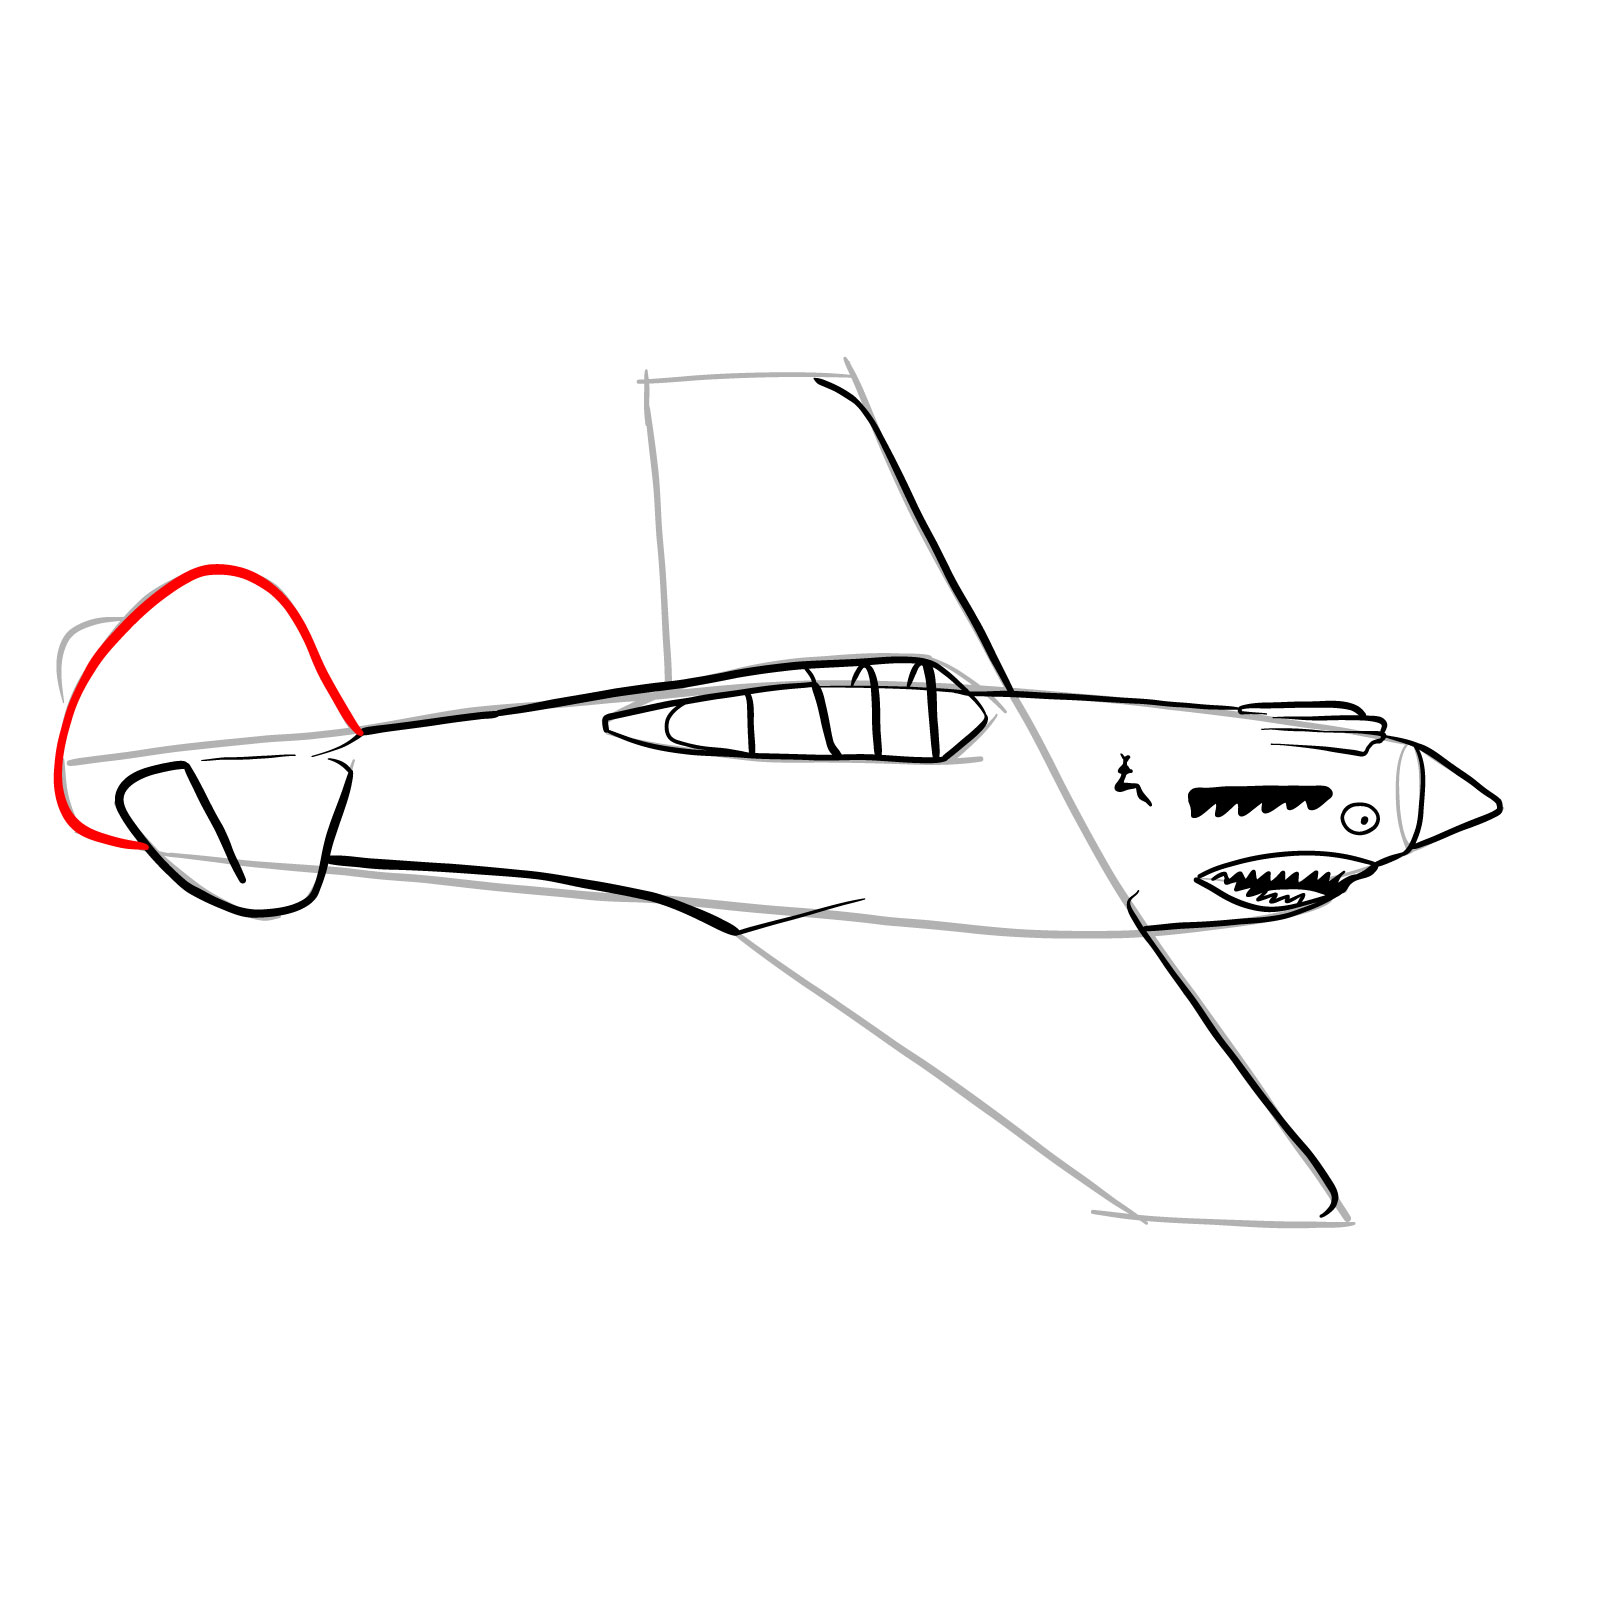 How to draw a P-40 Flying Tiger - step 19